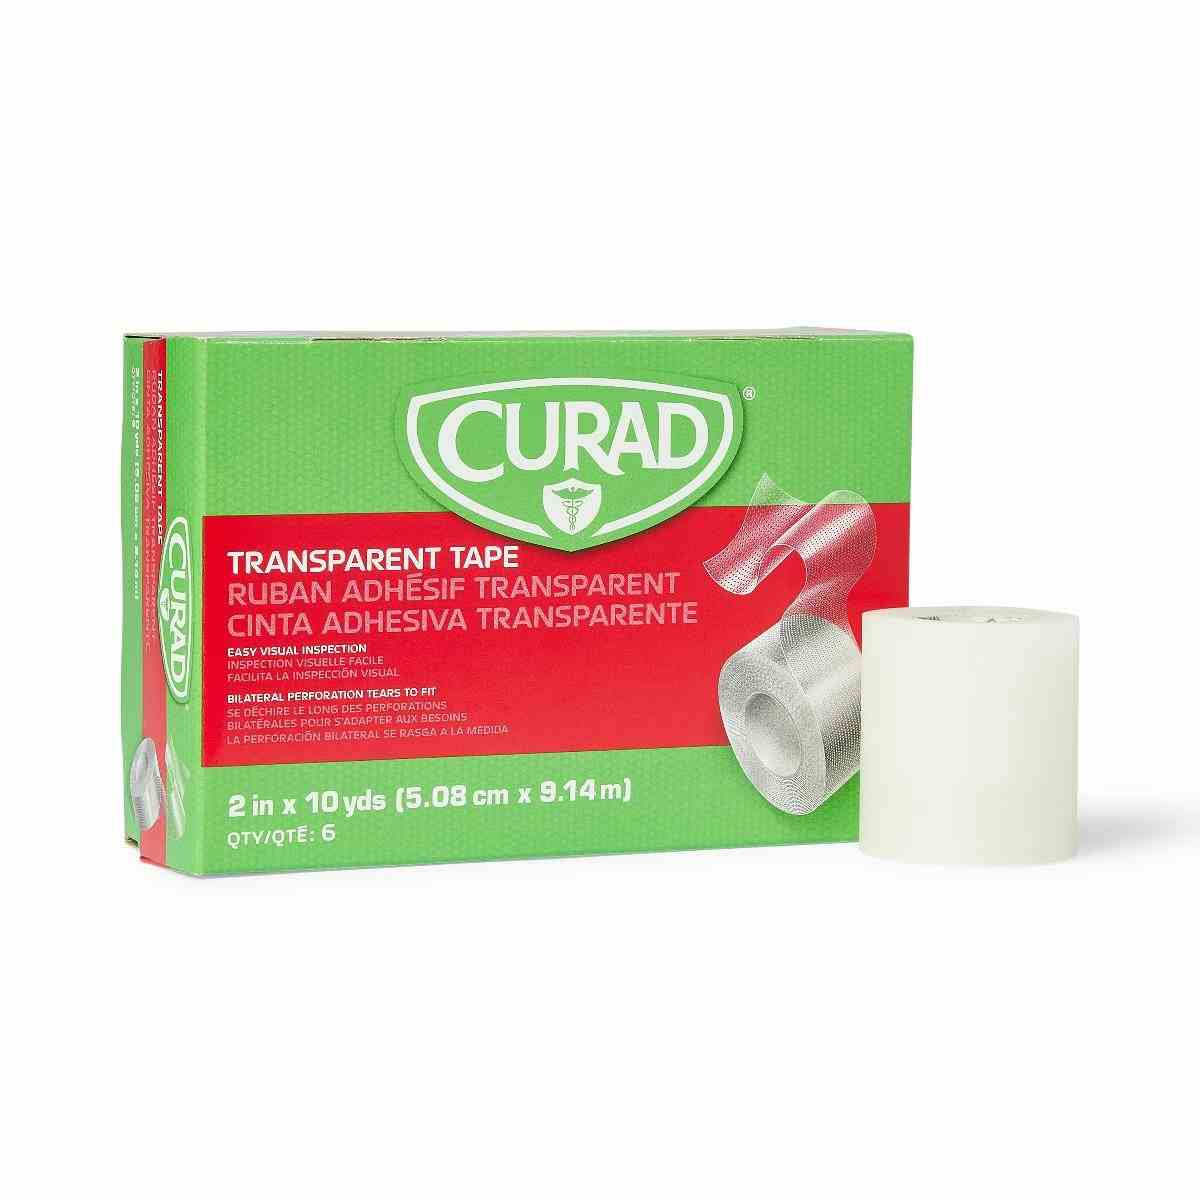 CURAD Transparent Adhesive Tape, NON270202Z, 2" X 10 yd - Box of 6